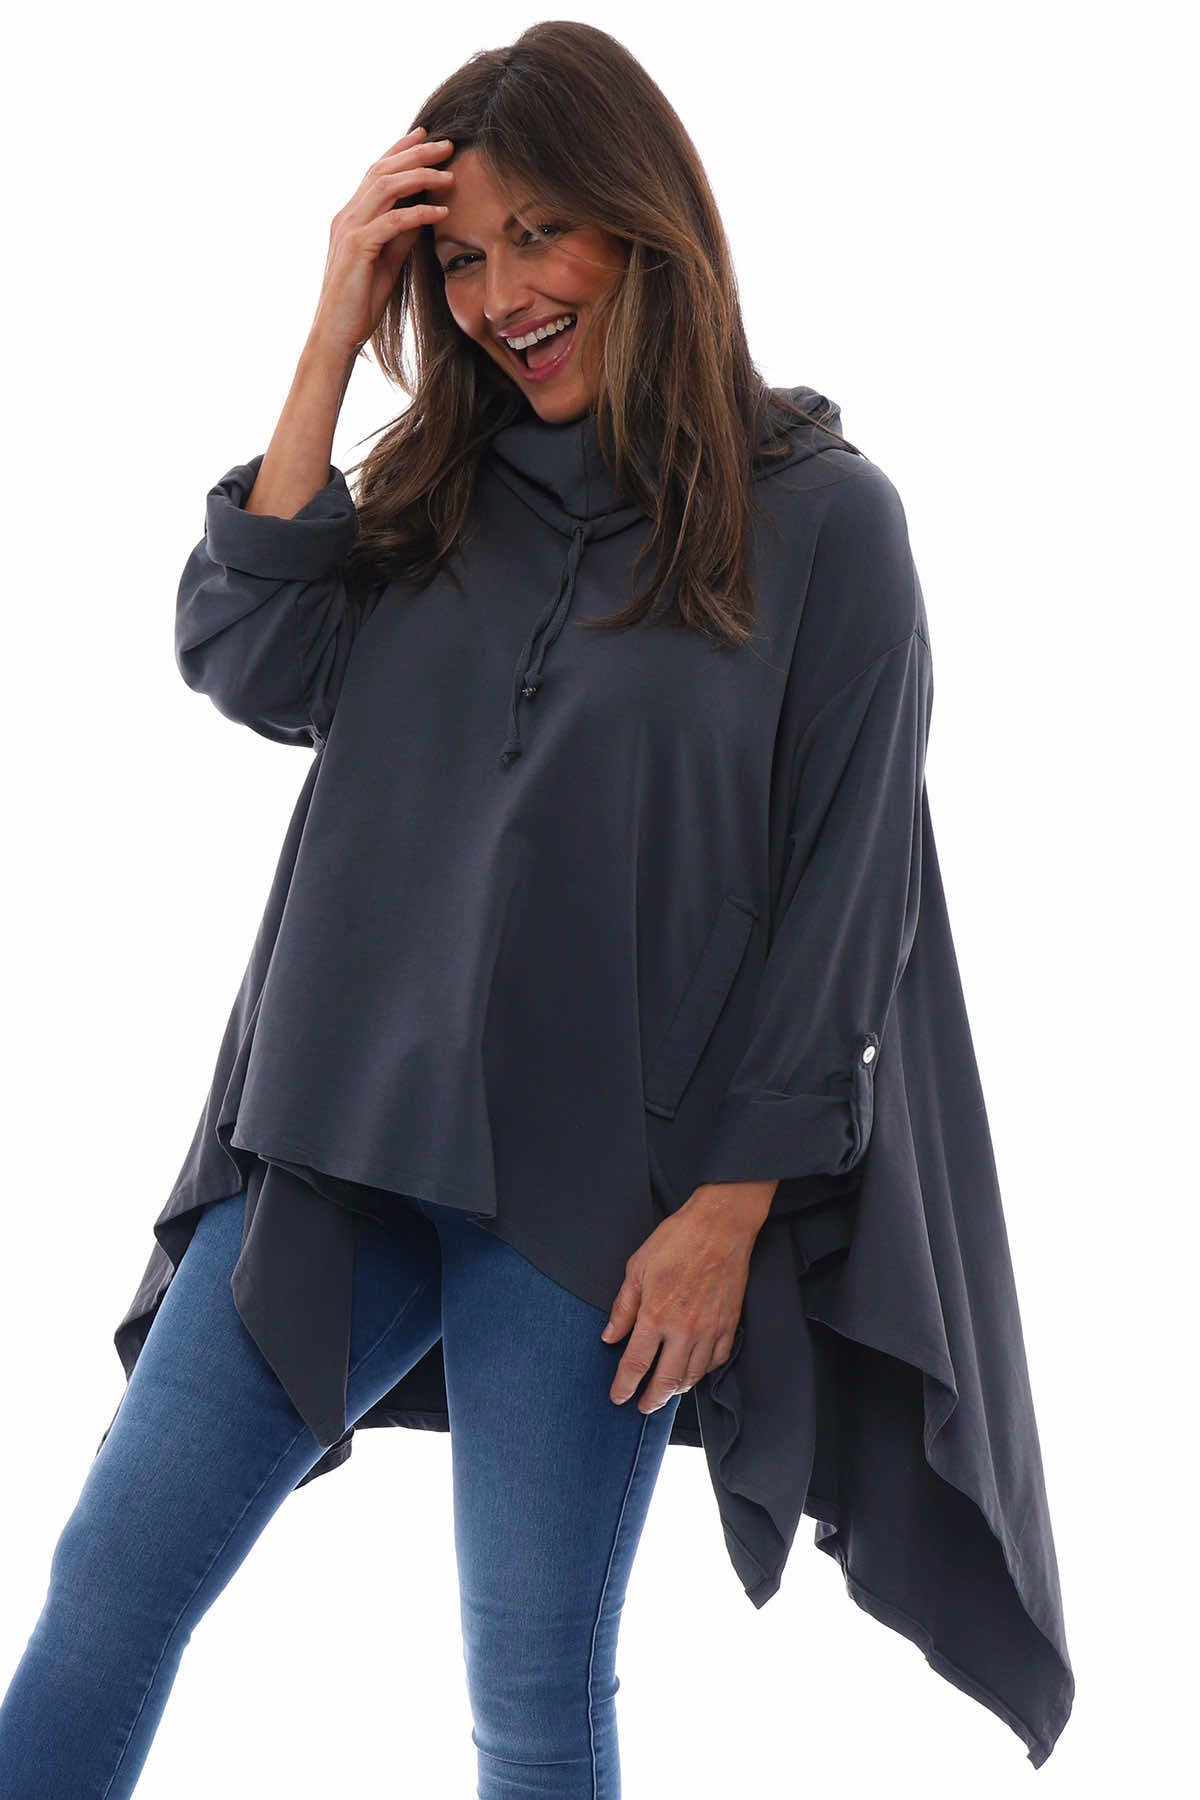 Stradella Cowl Neck Jersey Top Charcoal